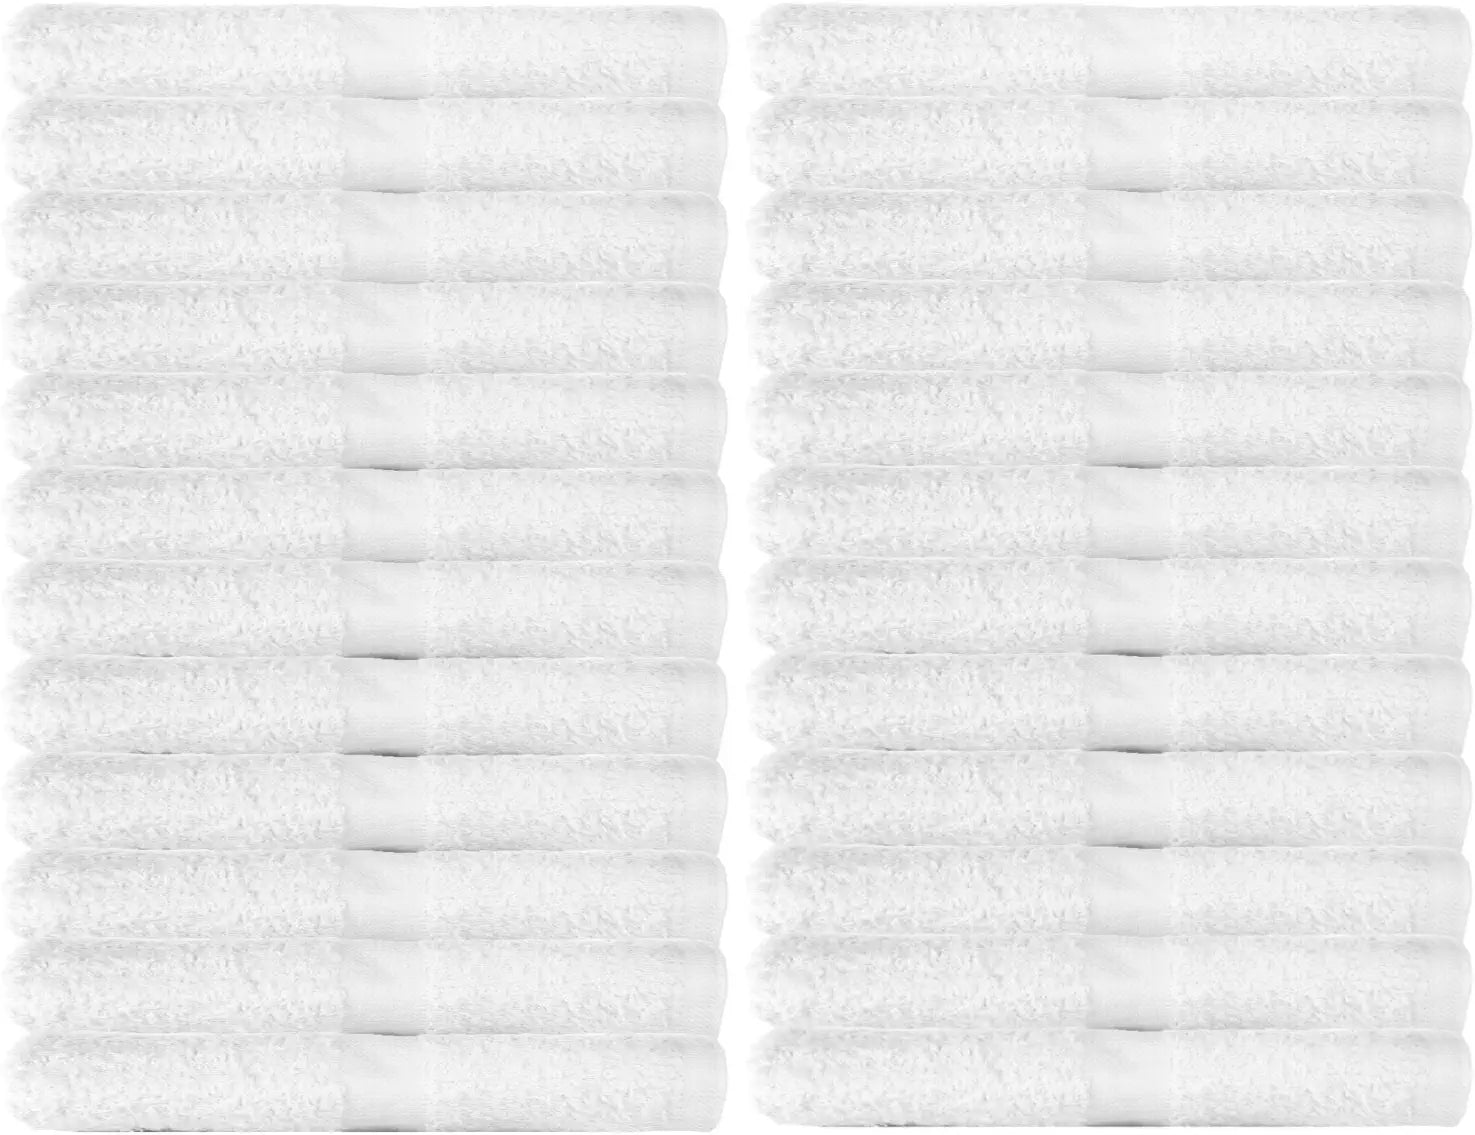 Wealuxe White Hand Towels for Bathroom 12 Pack 16x27 Inch, Cotton Hand Towel  Bulk for Gym and Spa, Soft Extra Absorbent Quick Dry Terry Bath Towels